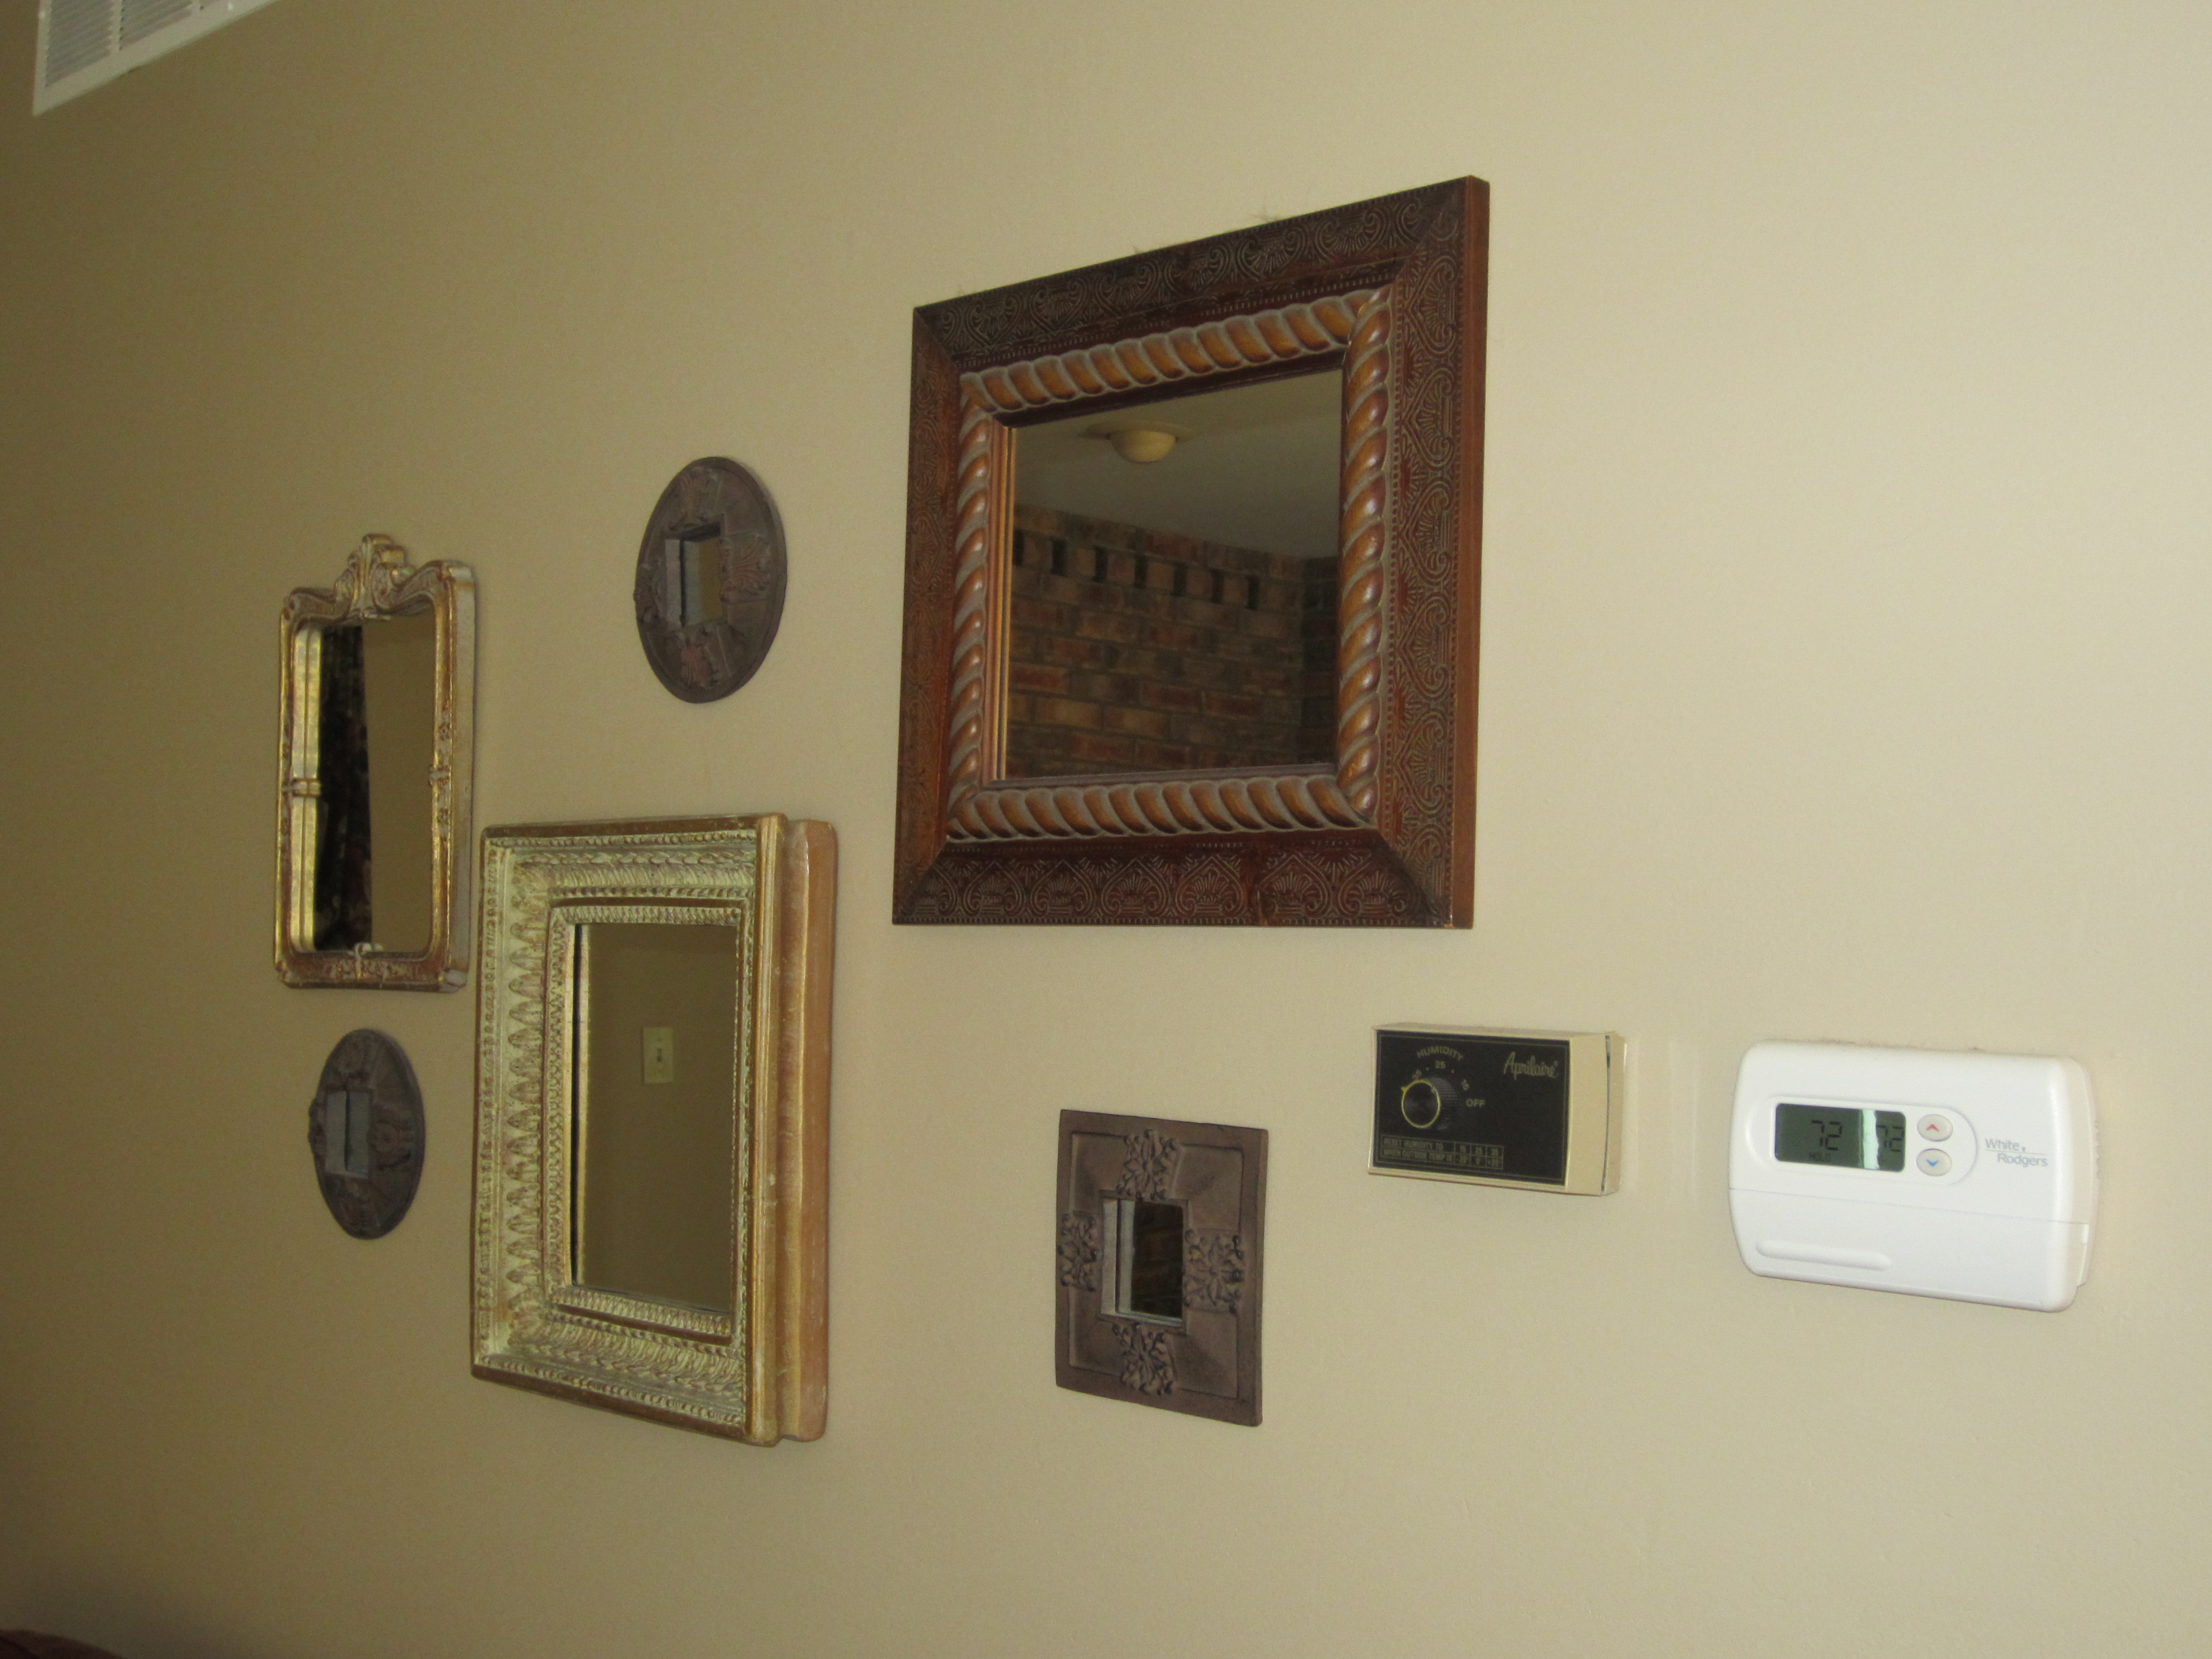 Thermostats, humidifier dials, smoke alarms, etc are less